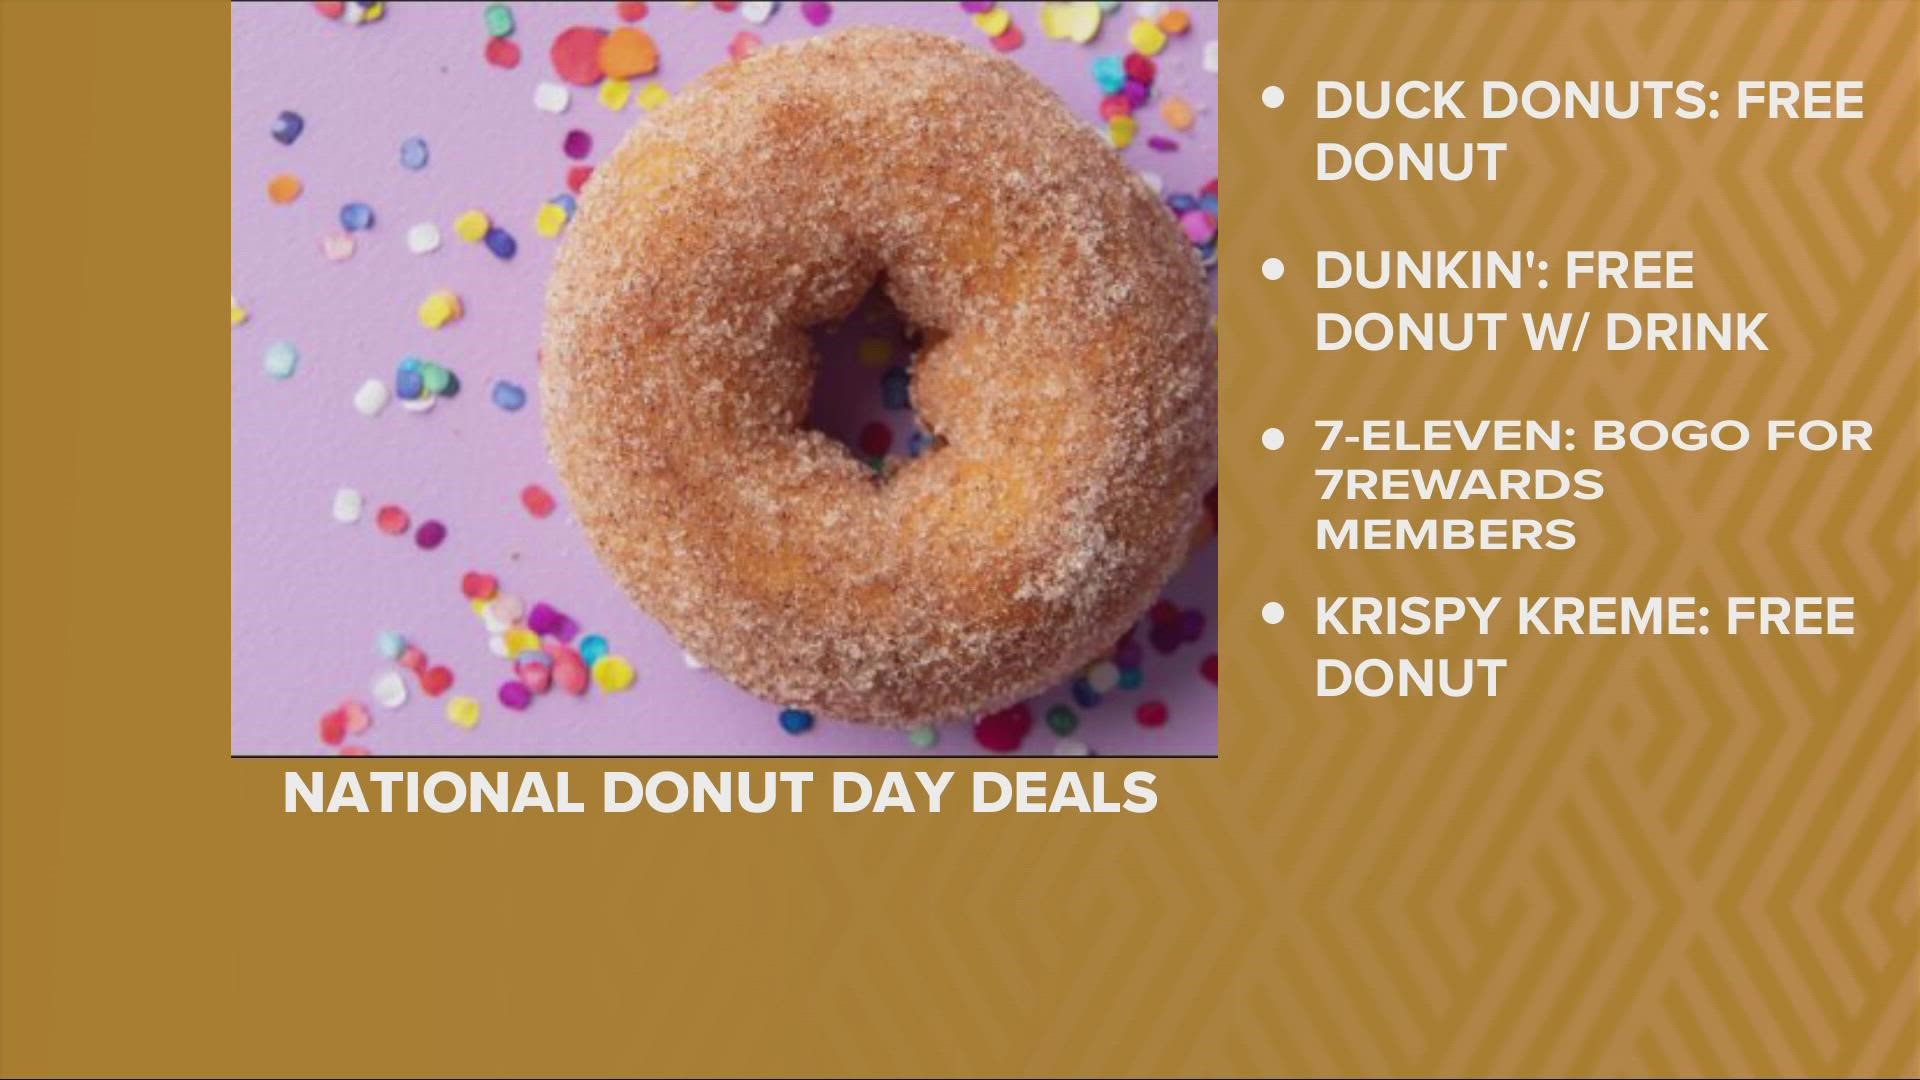 It's National Donut Day and there are plenty of deals to take advantage of in Northeast Ohio.